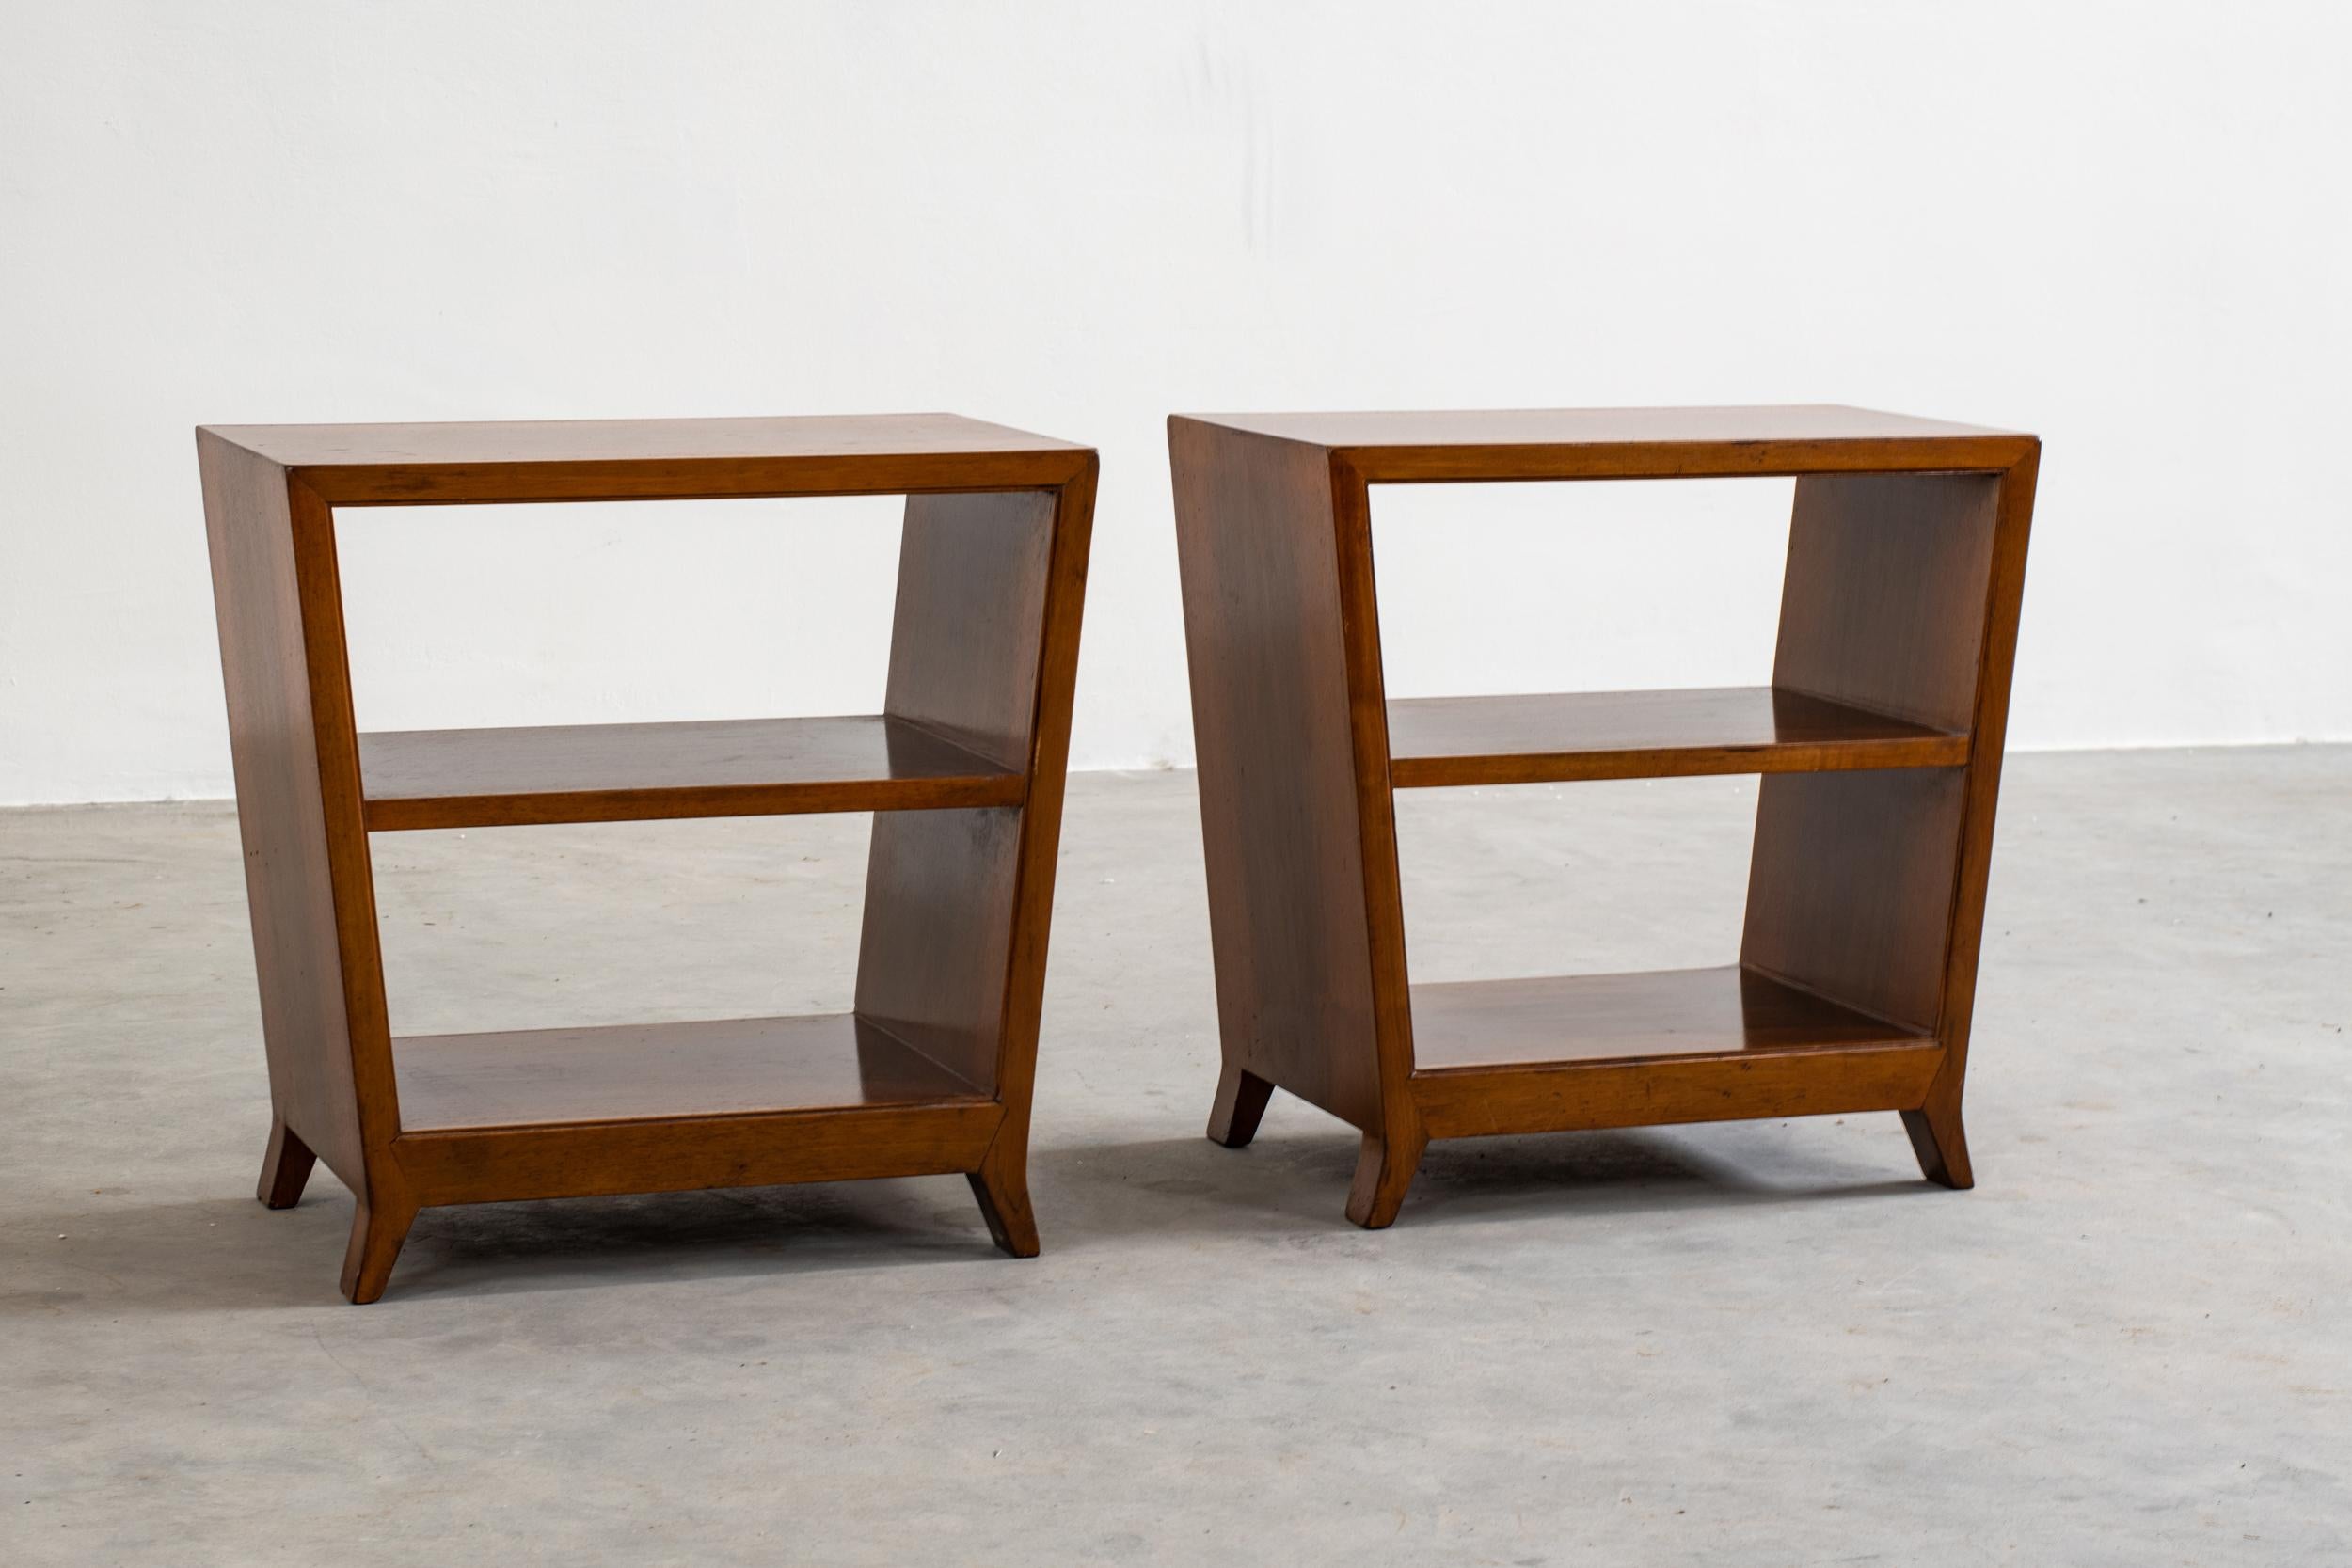 Italian Gio Ponti Set of Two Side Tables with Shelves in Walnut Schirolli 1950s